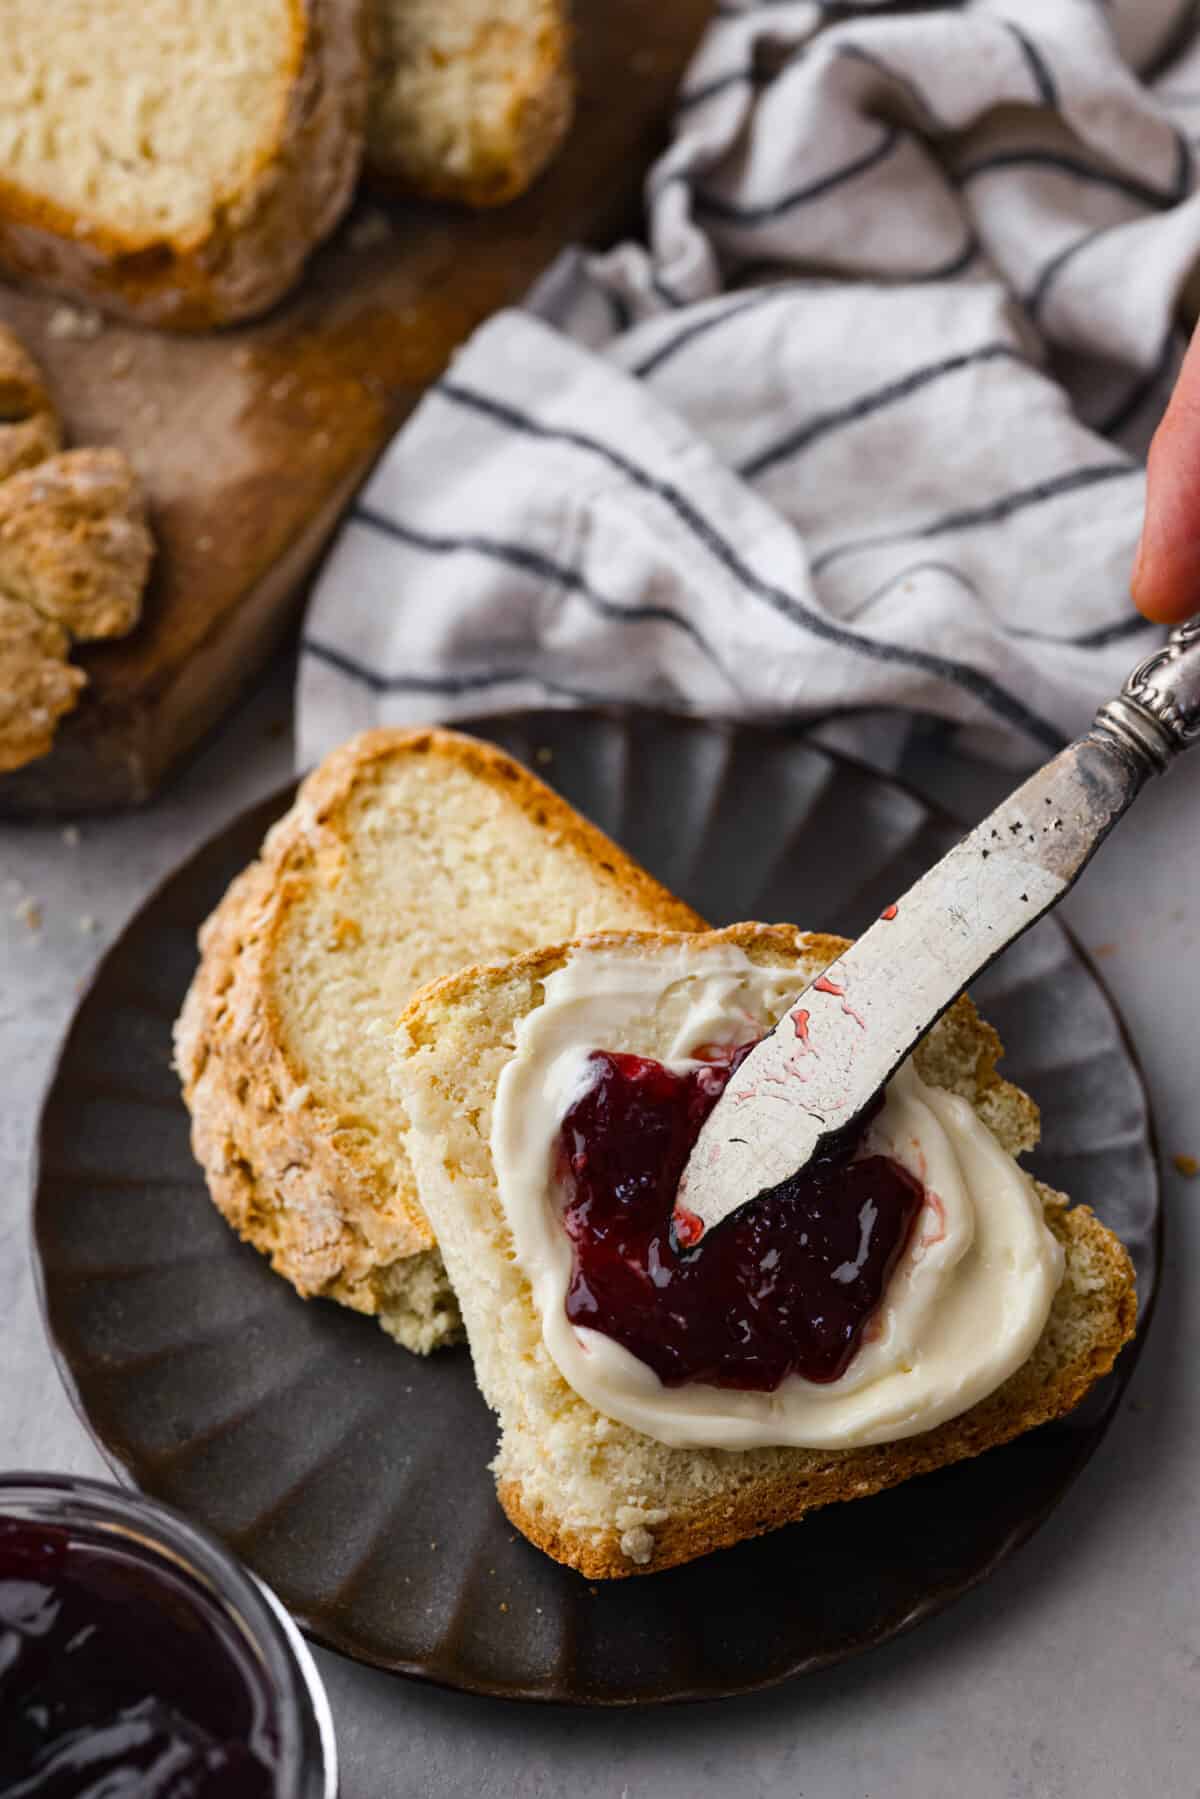 Spreading butter and jam over a slice of bread.